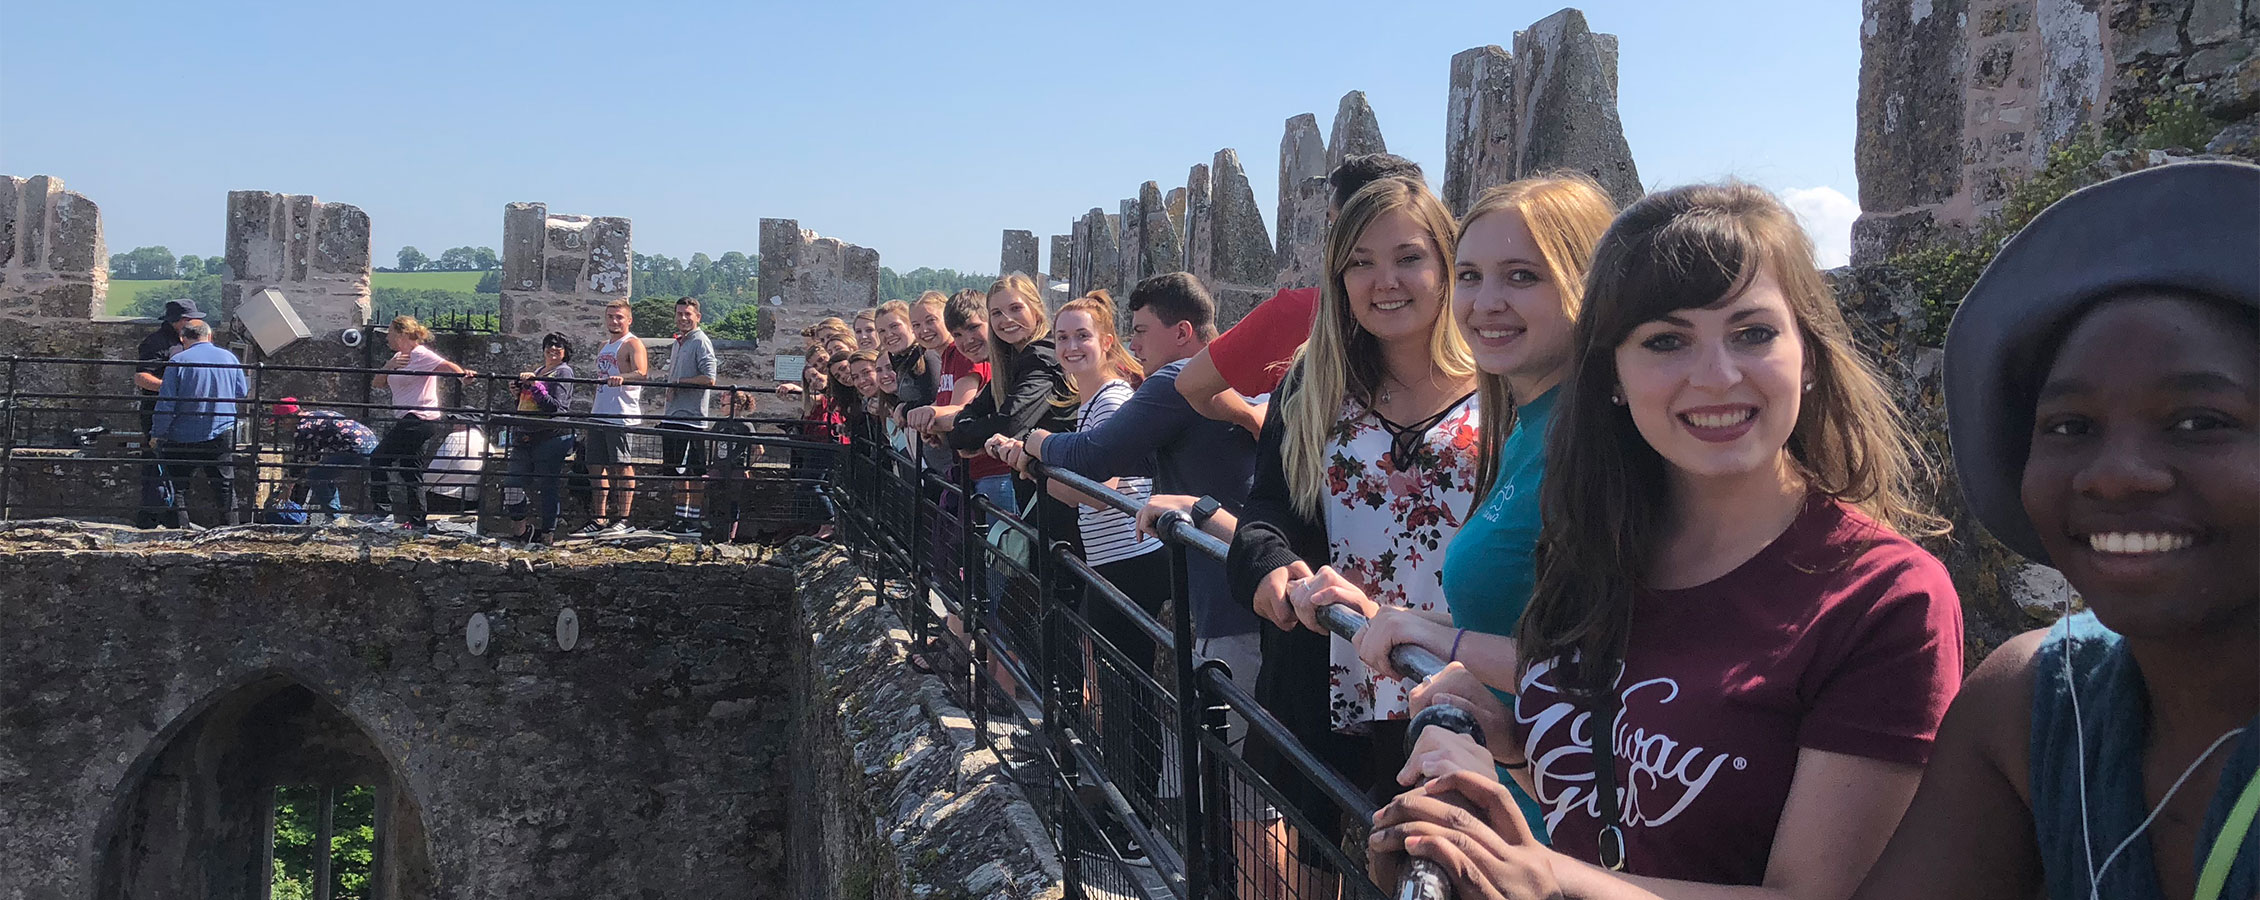 Communication students from UW-Whitewater visit the Blarney Castle in Ireland.